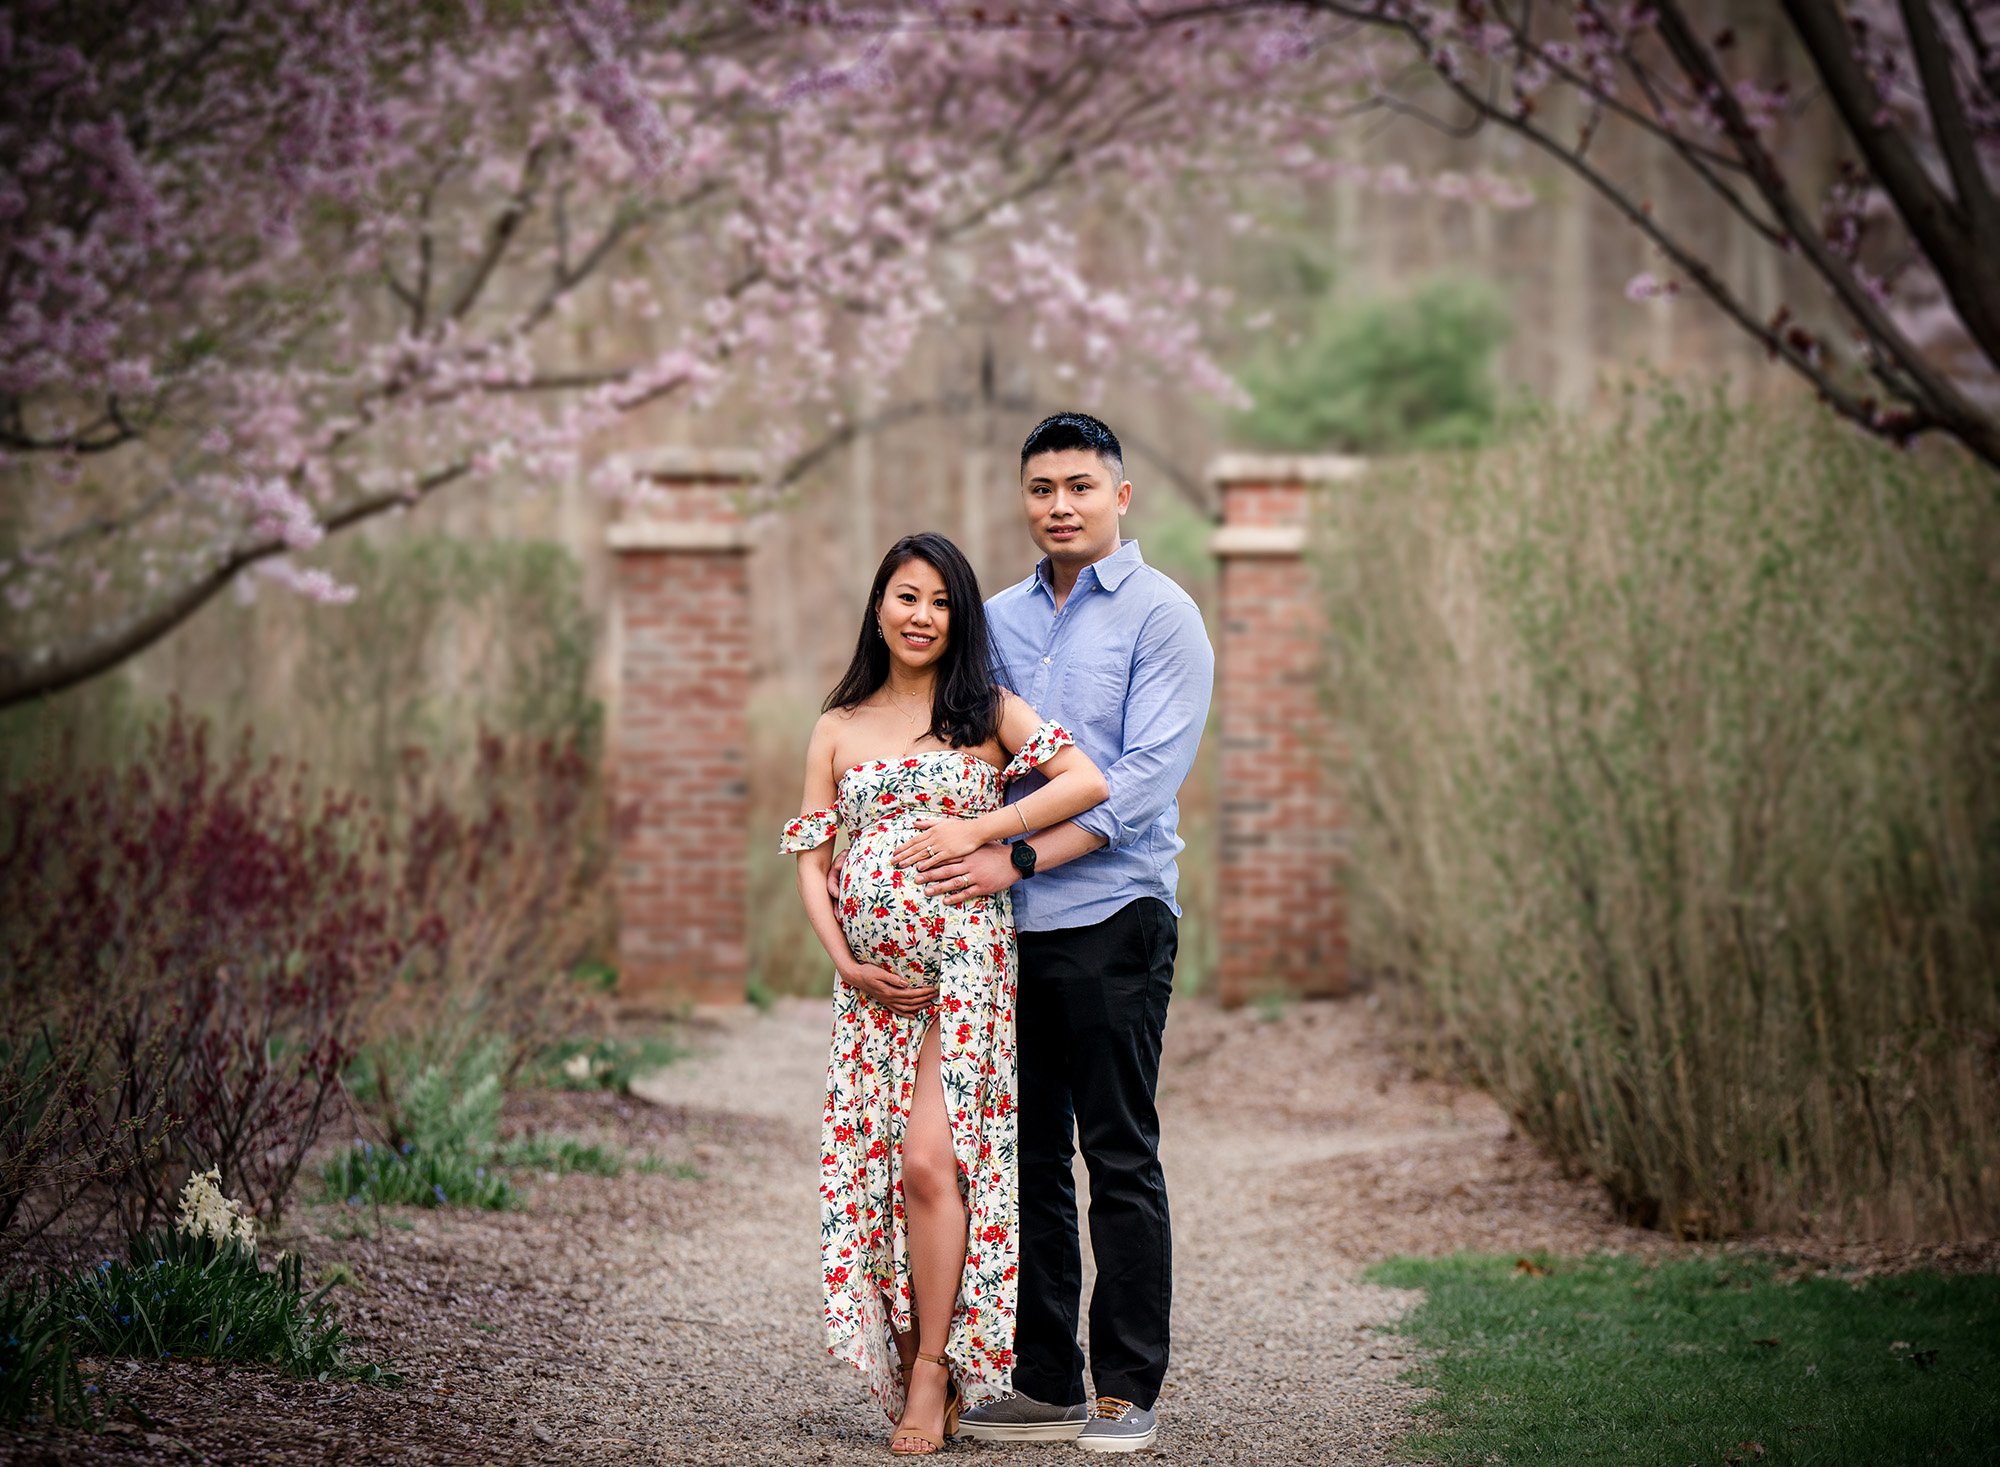 pregnant woman in floral maternity dress posing with partner under weeping cherry trees in front of a brick archway